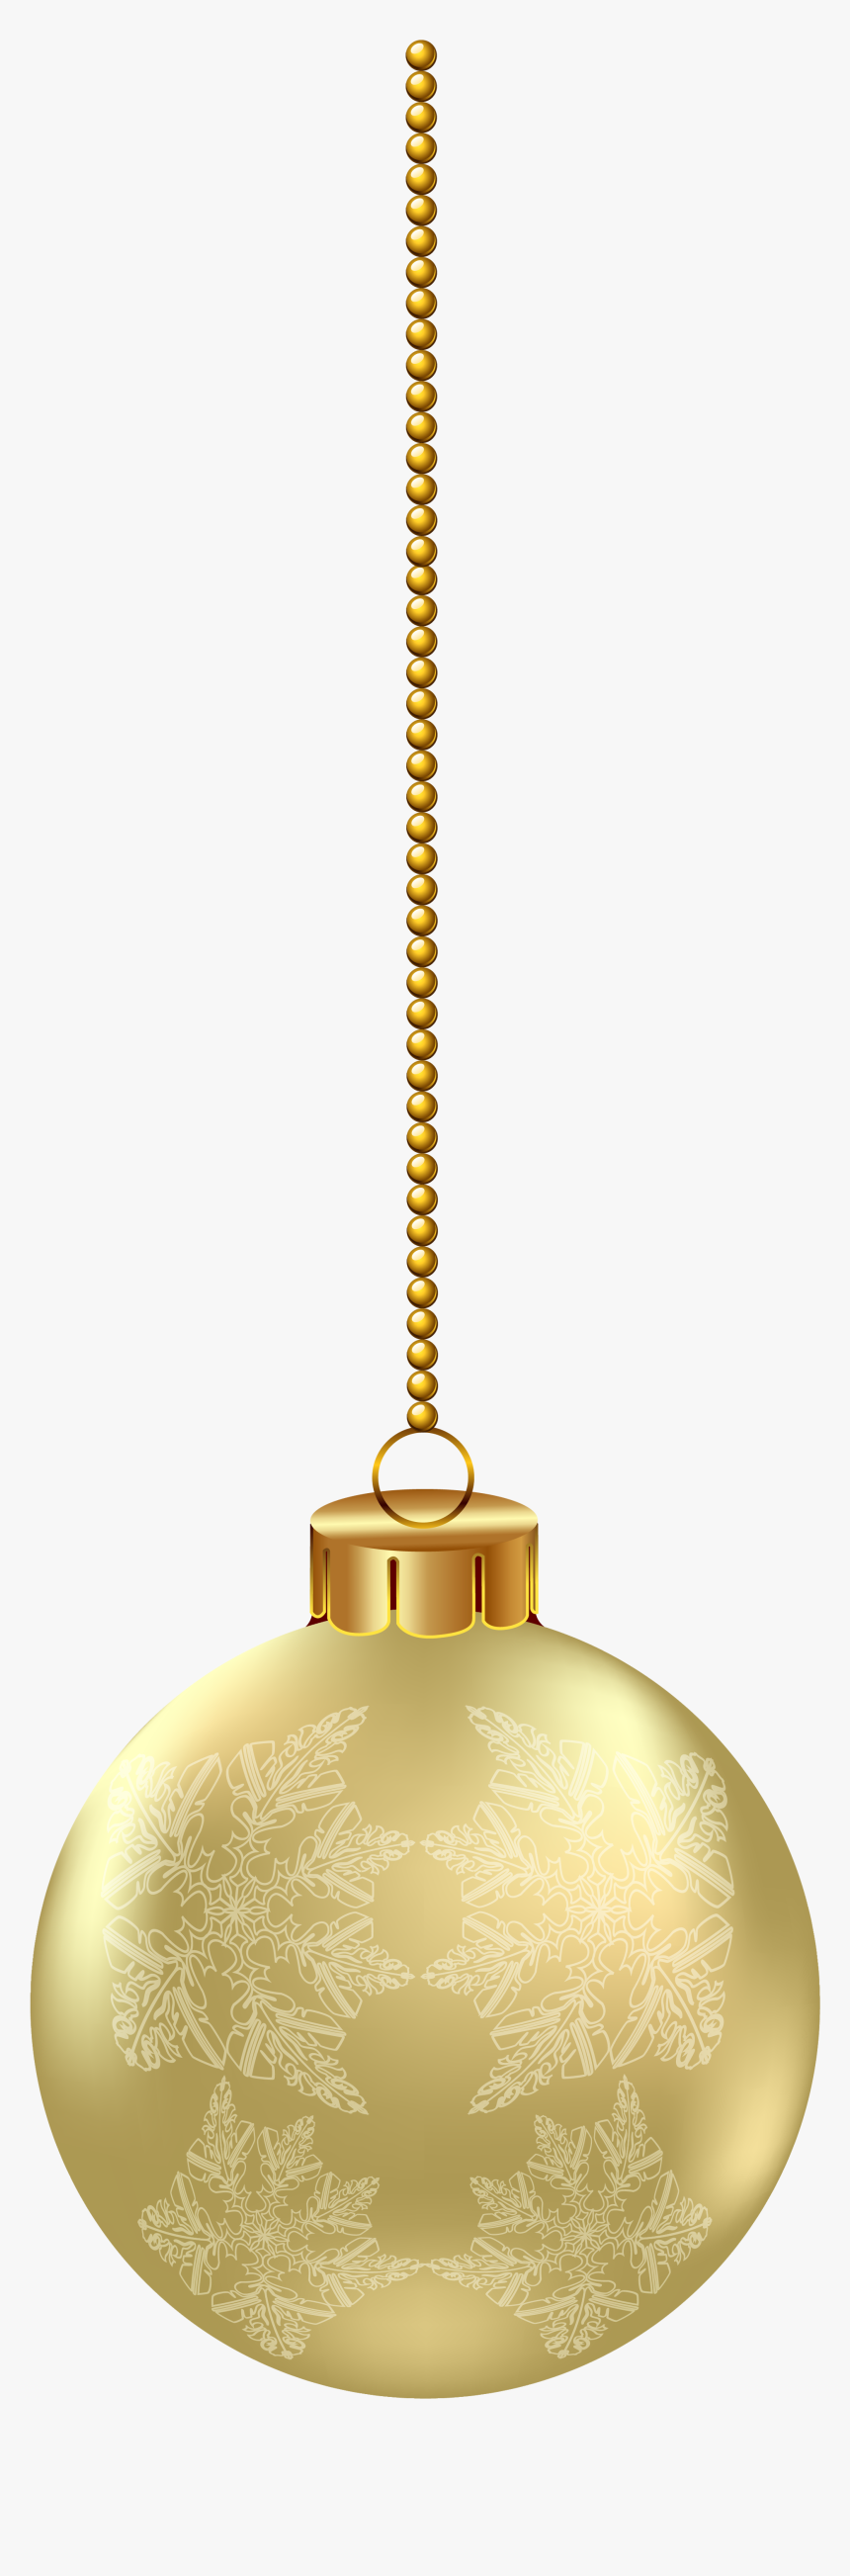 Hanging Christmas Ornament Png Clipart Image - Hanging Christmas Decoration Png, Transparent Png, Free Download